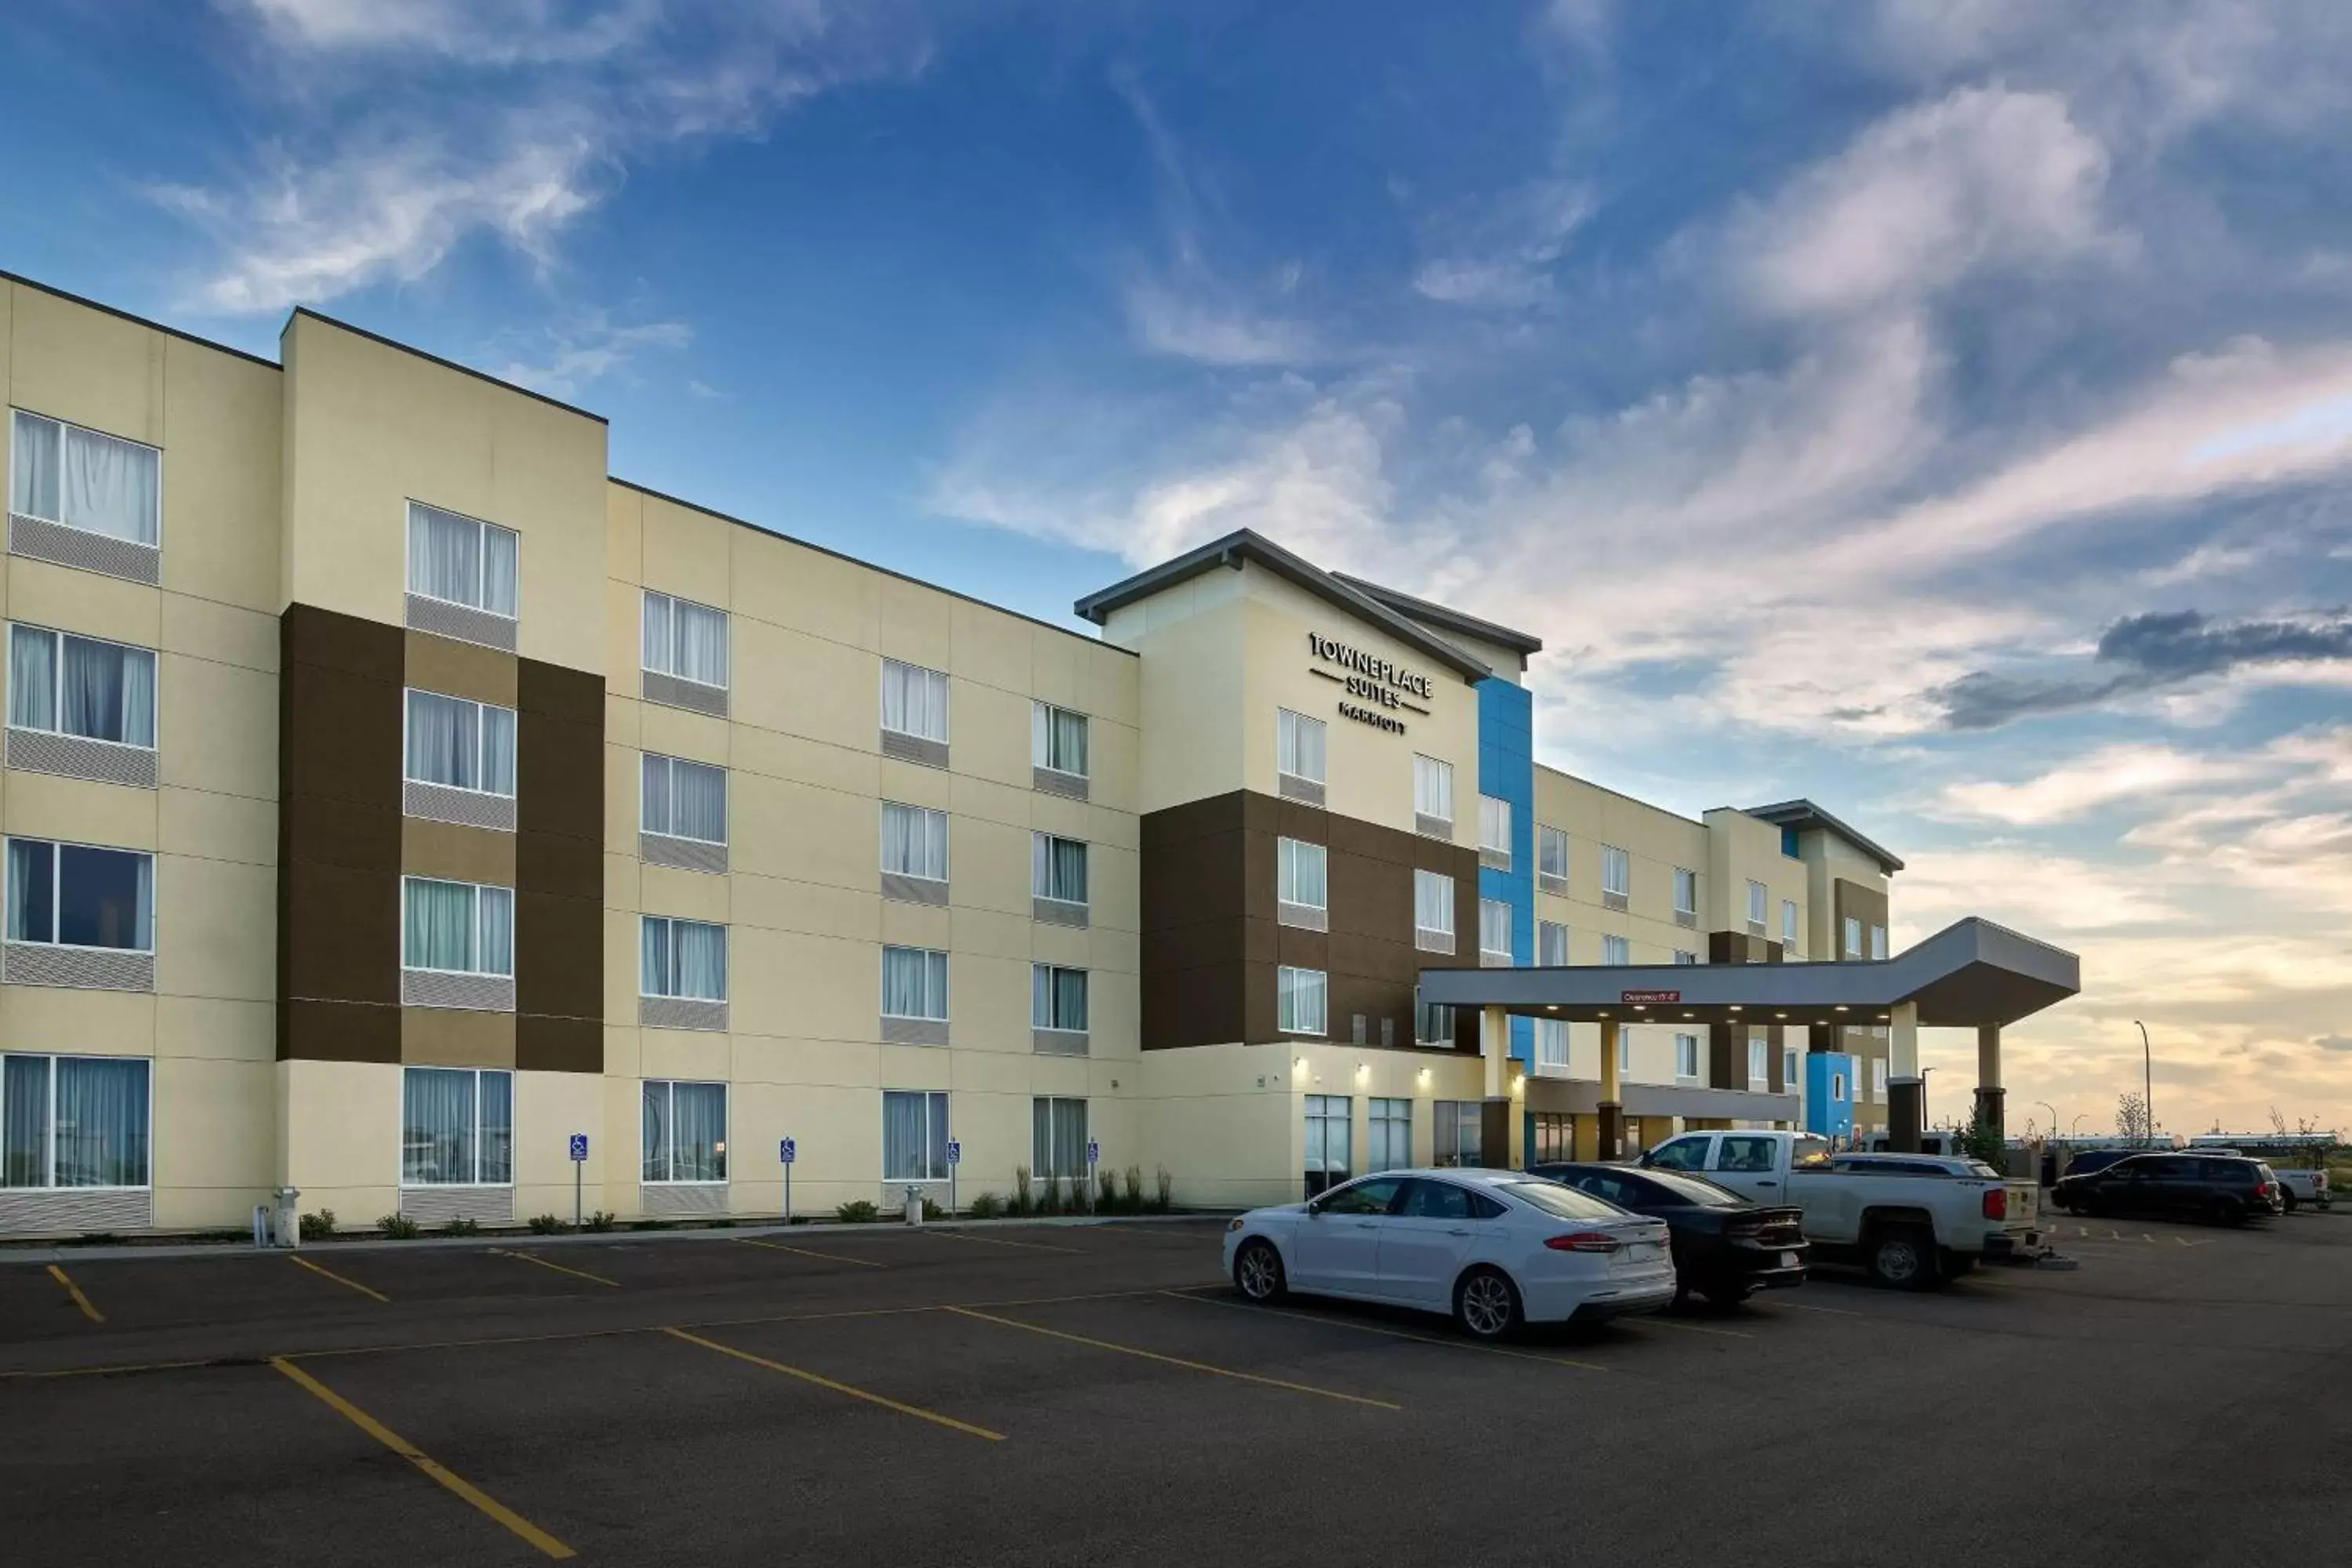 Property Building in TownePlace Suites by Marriott Edmonton Sherwood Park